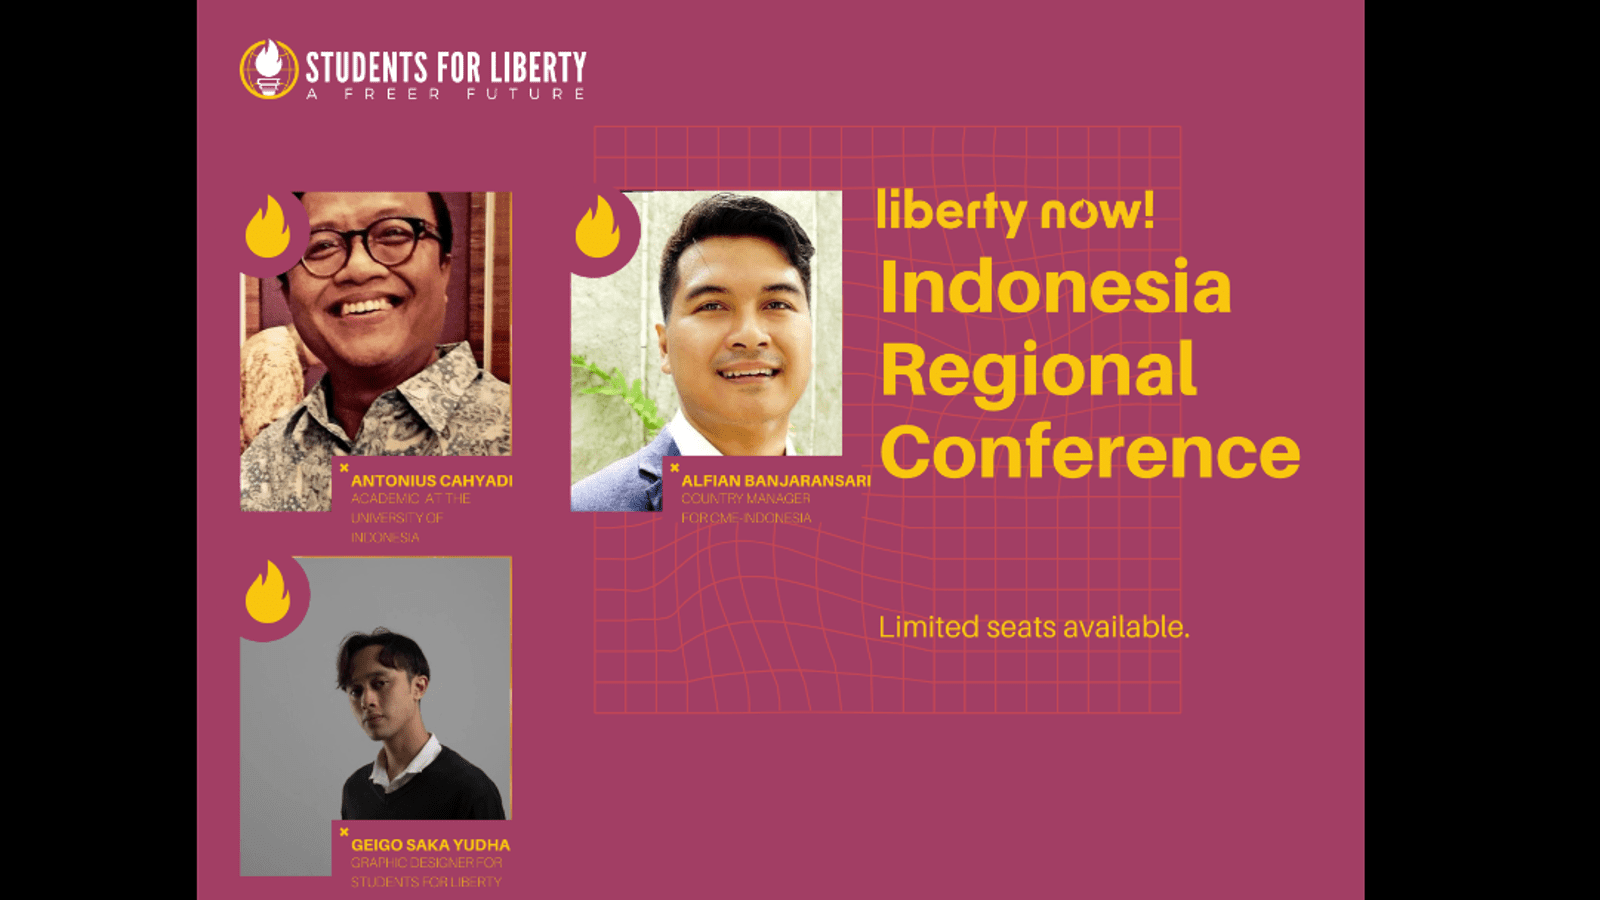 Students For Liberty Indonesia will host their Liberty Now regional conference on July 29, 2023